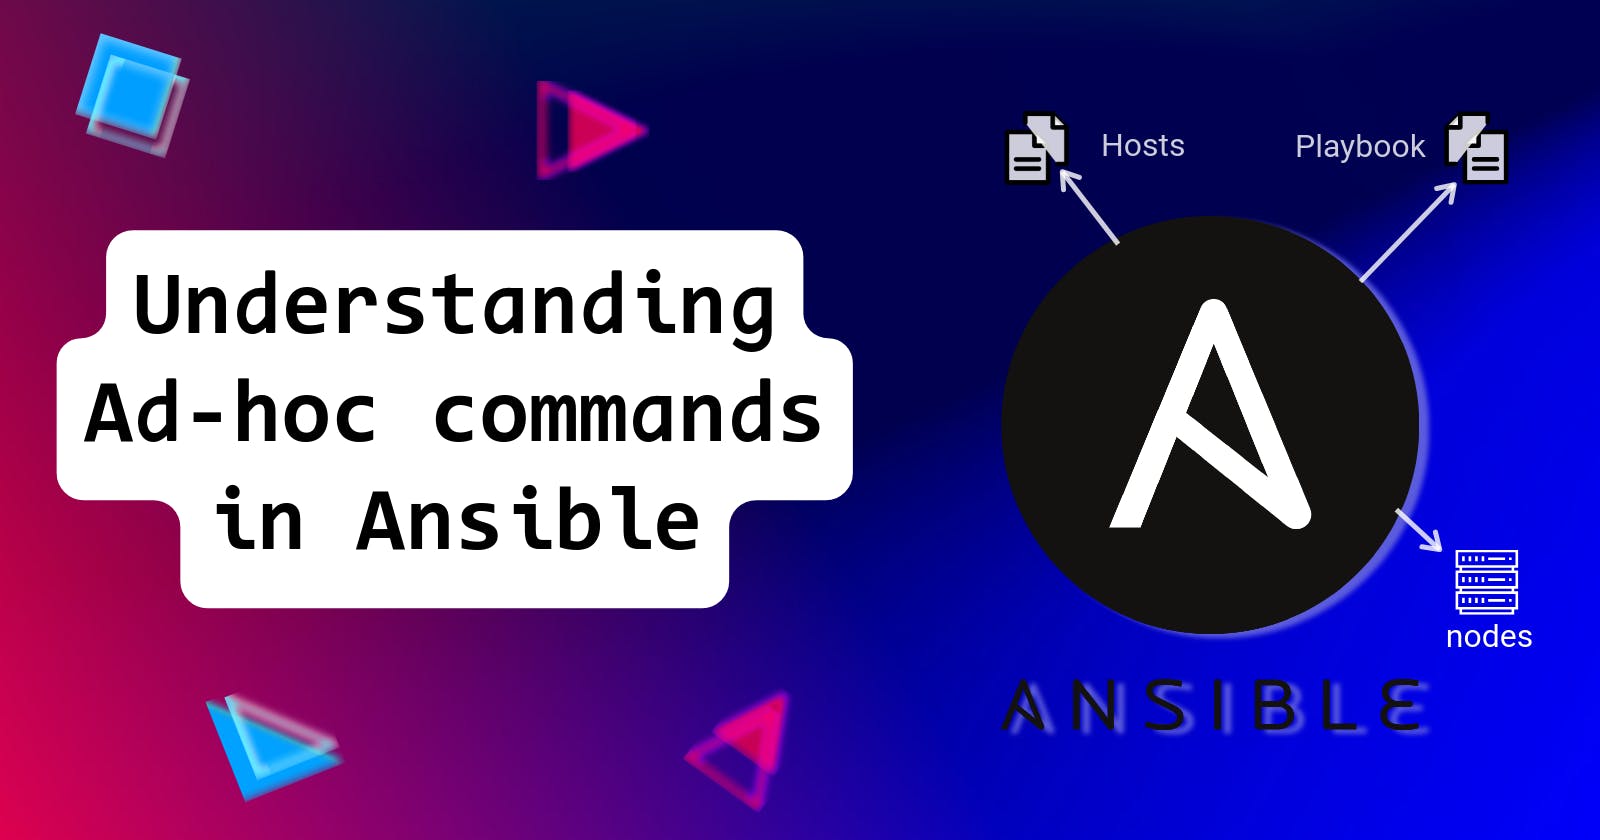 Ad-hoc commands in Ansible